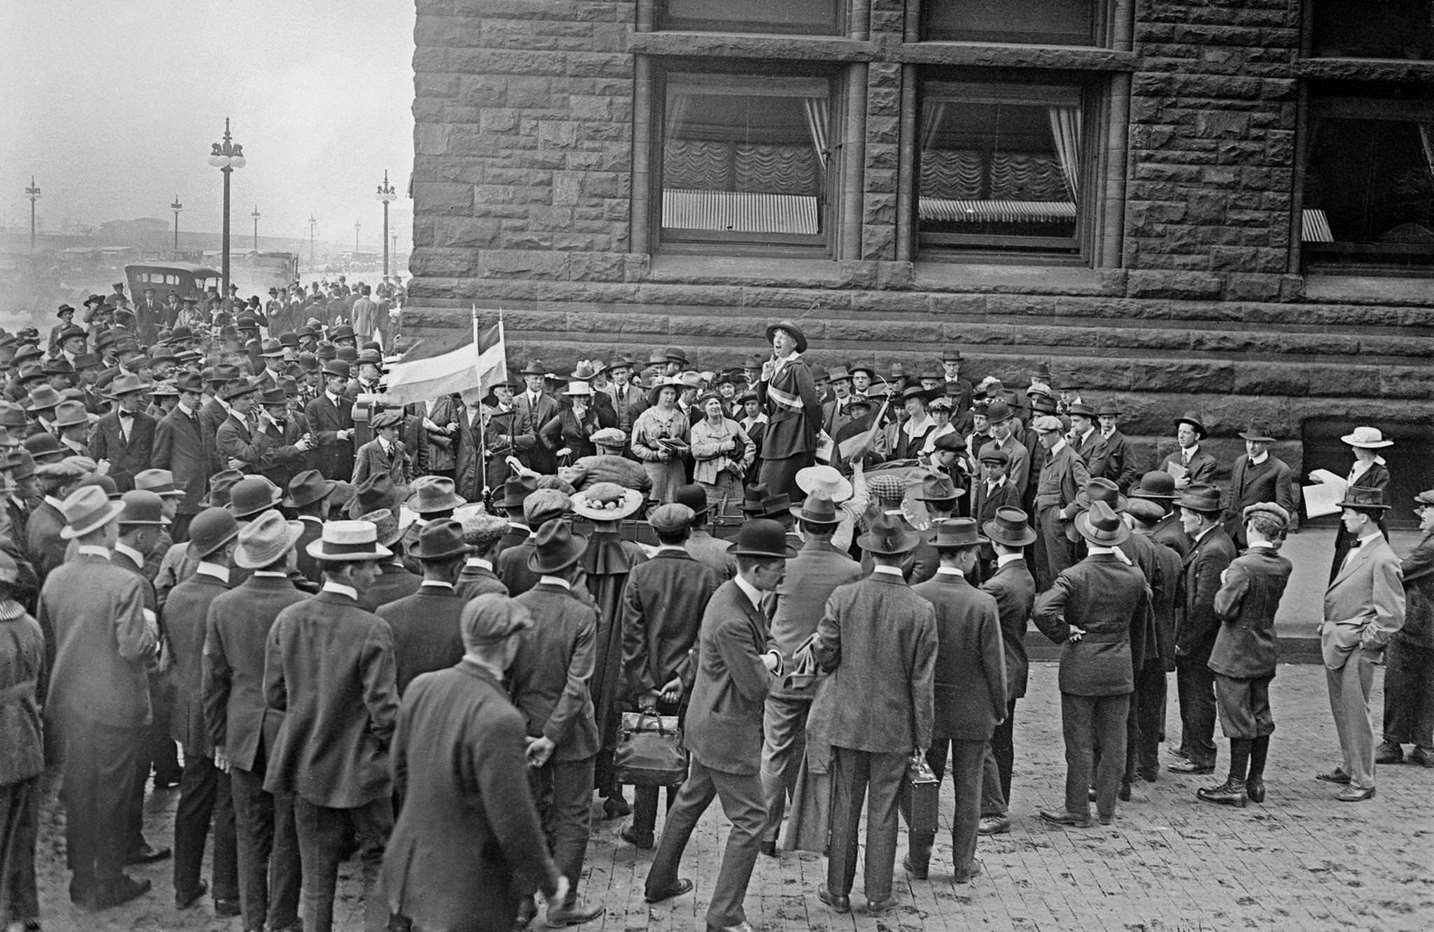 Mabel Vernon, a suffragist, speaking to a crowd on the corner of East Van Buren Street and South Michigan Avenue in the Loop community area of Chicago, Illinois, 1916